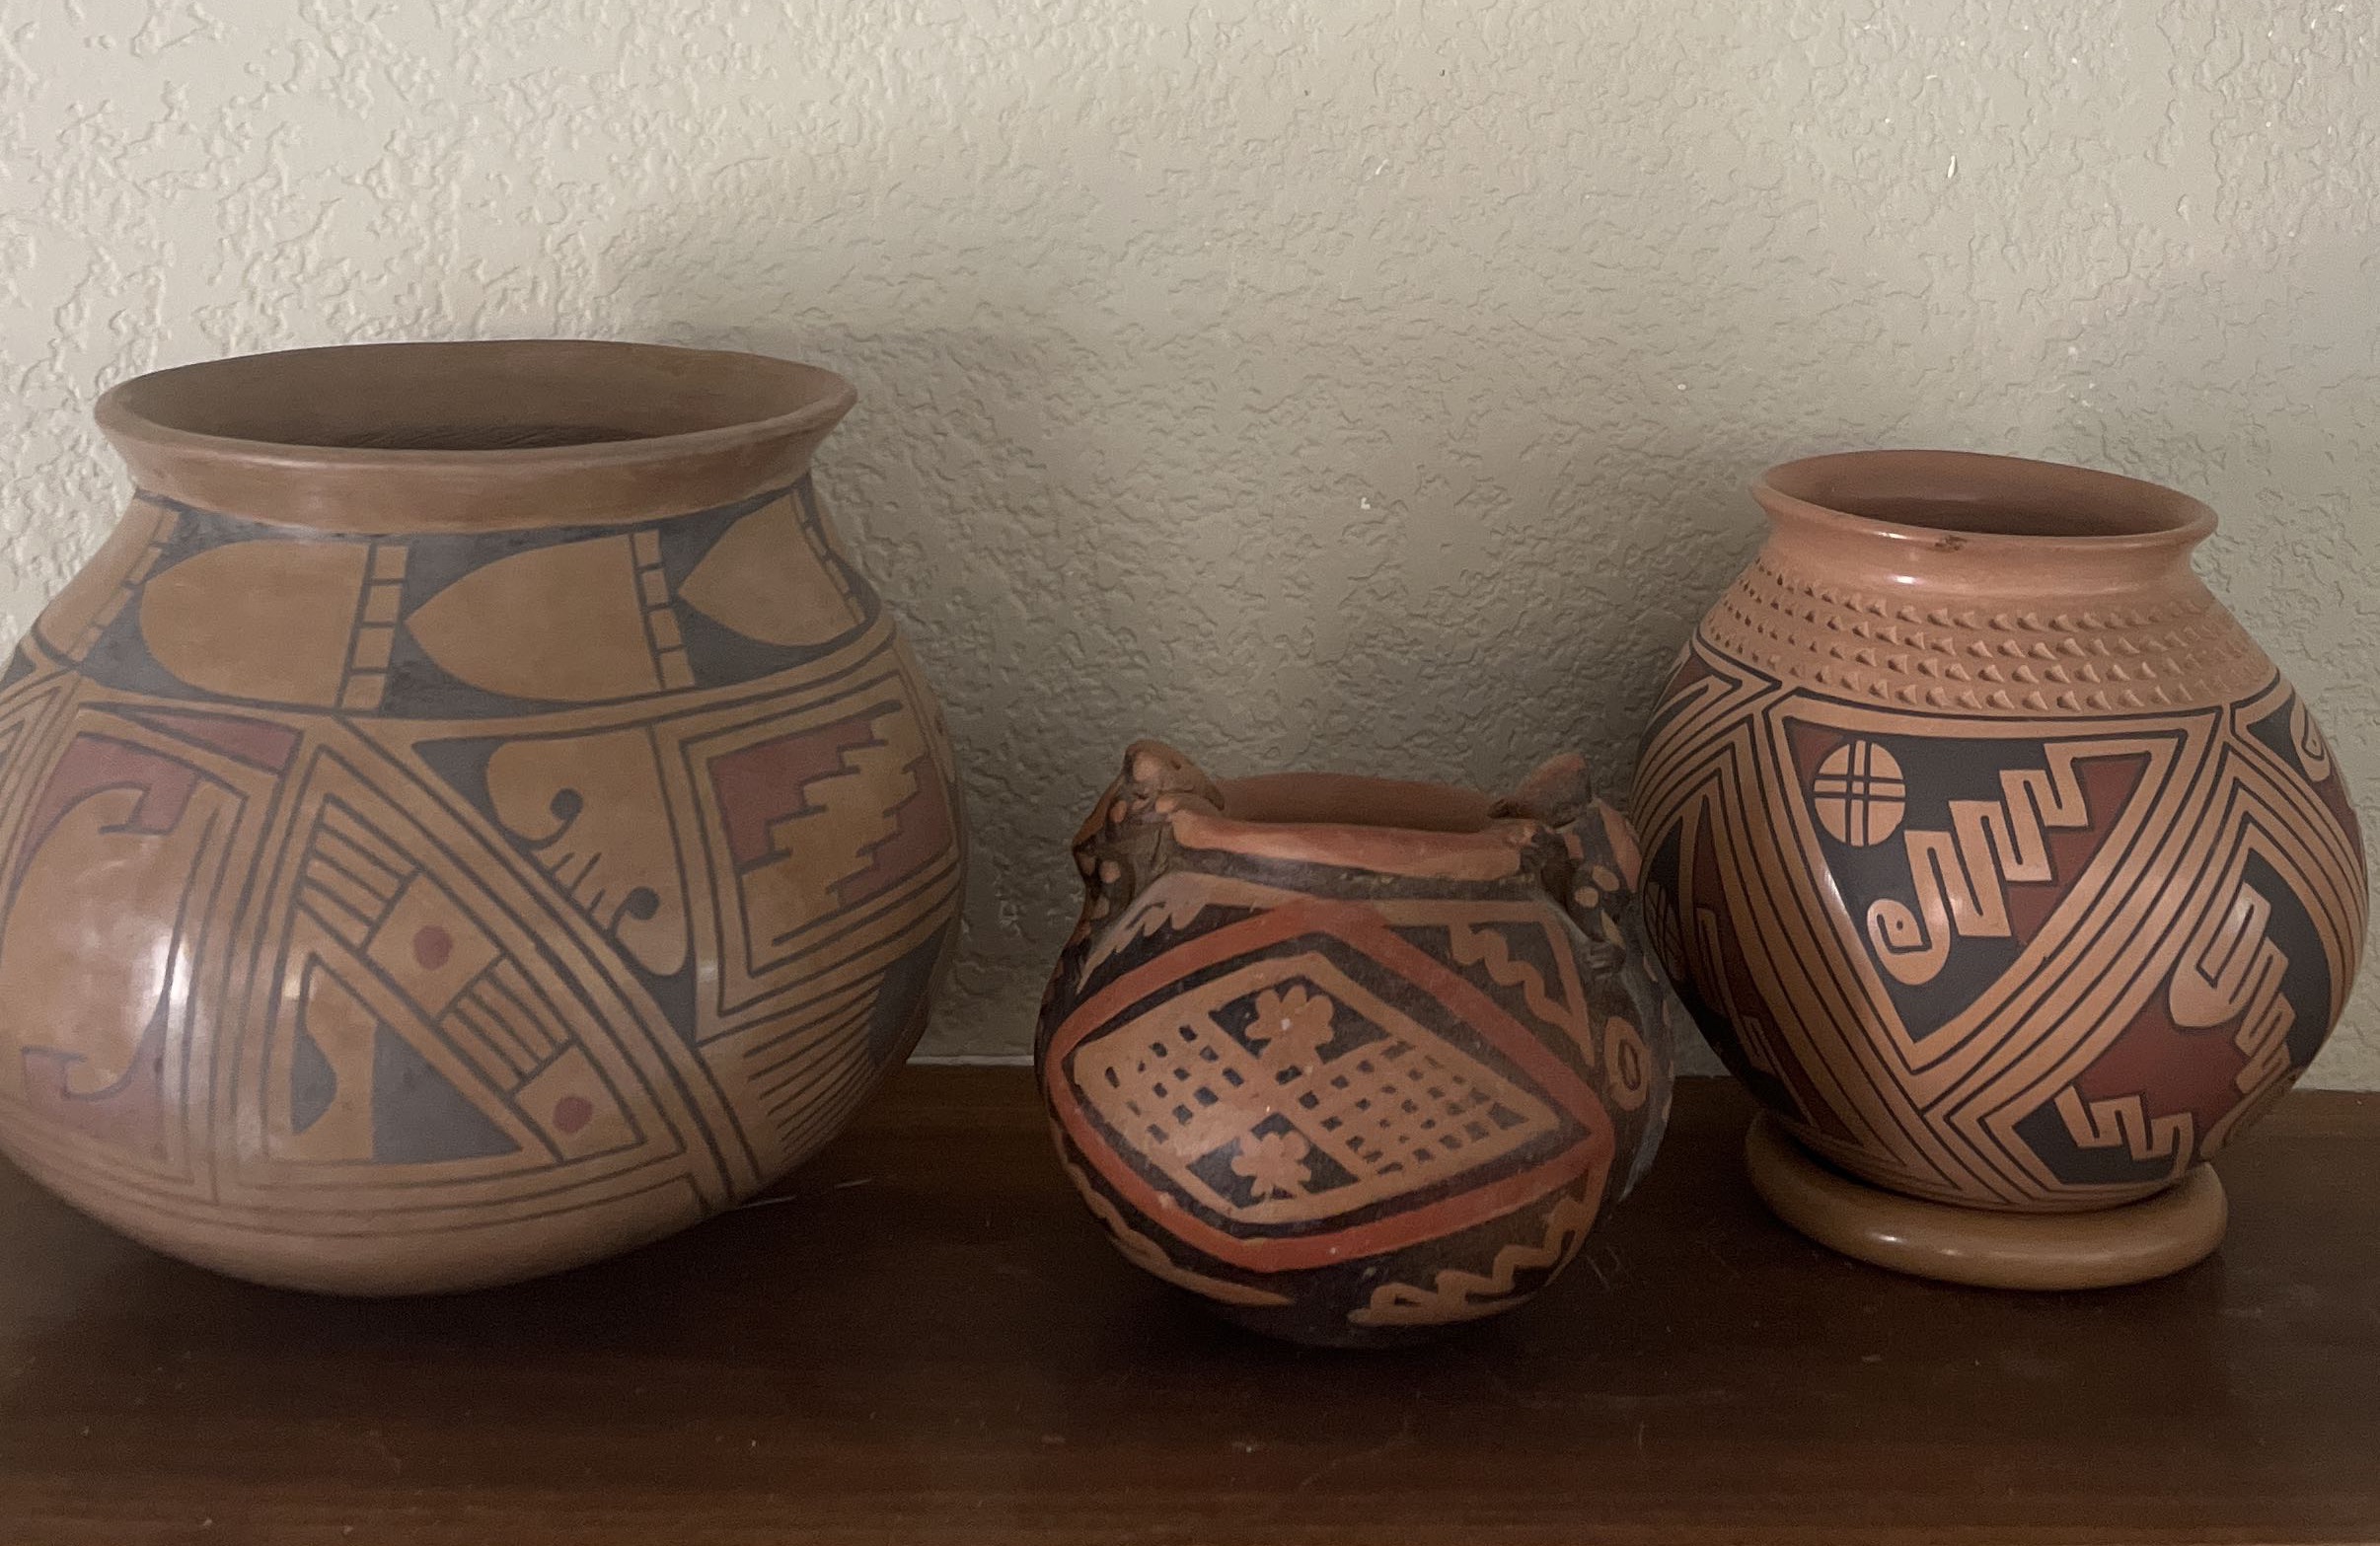 Vary rare and large 1980s southwest indians native americans pottery - Ruby  Lane